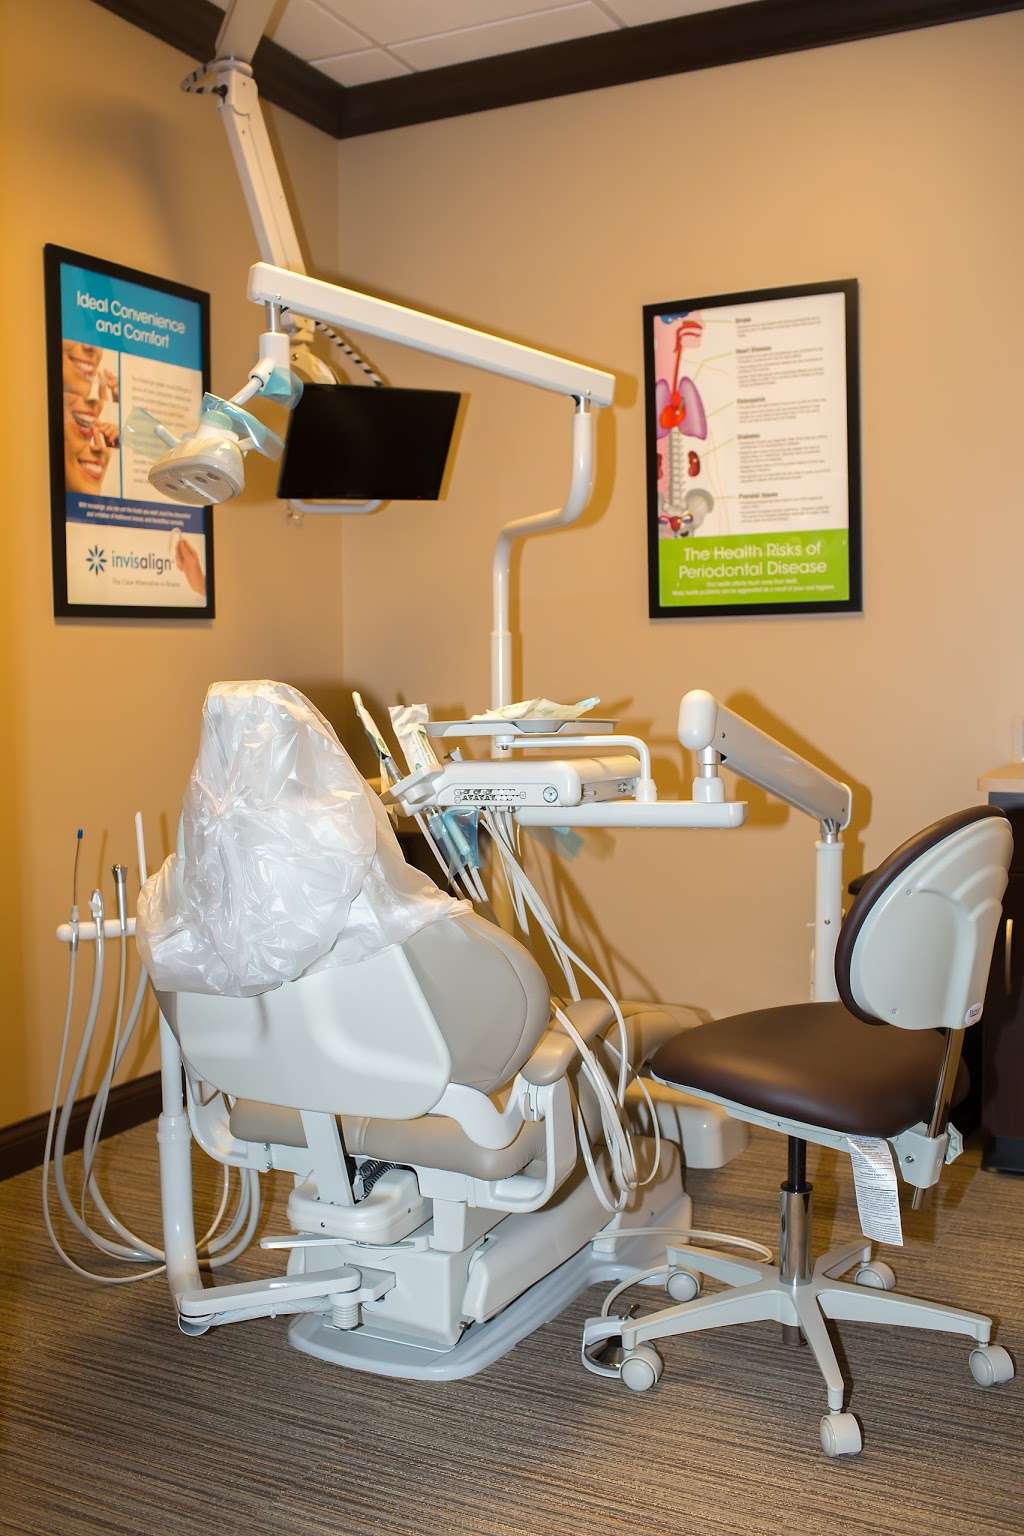 Kingsley Family Dental Care | 12567 Broadway St Ste. 129, Pearland, TX 77584 | Phone: (832) 672-8648